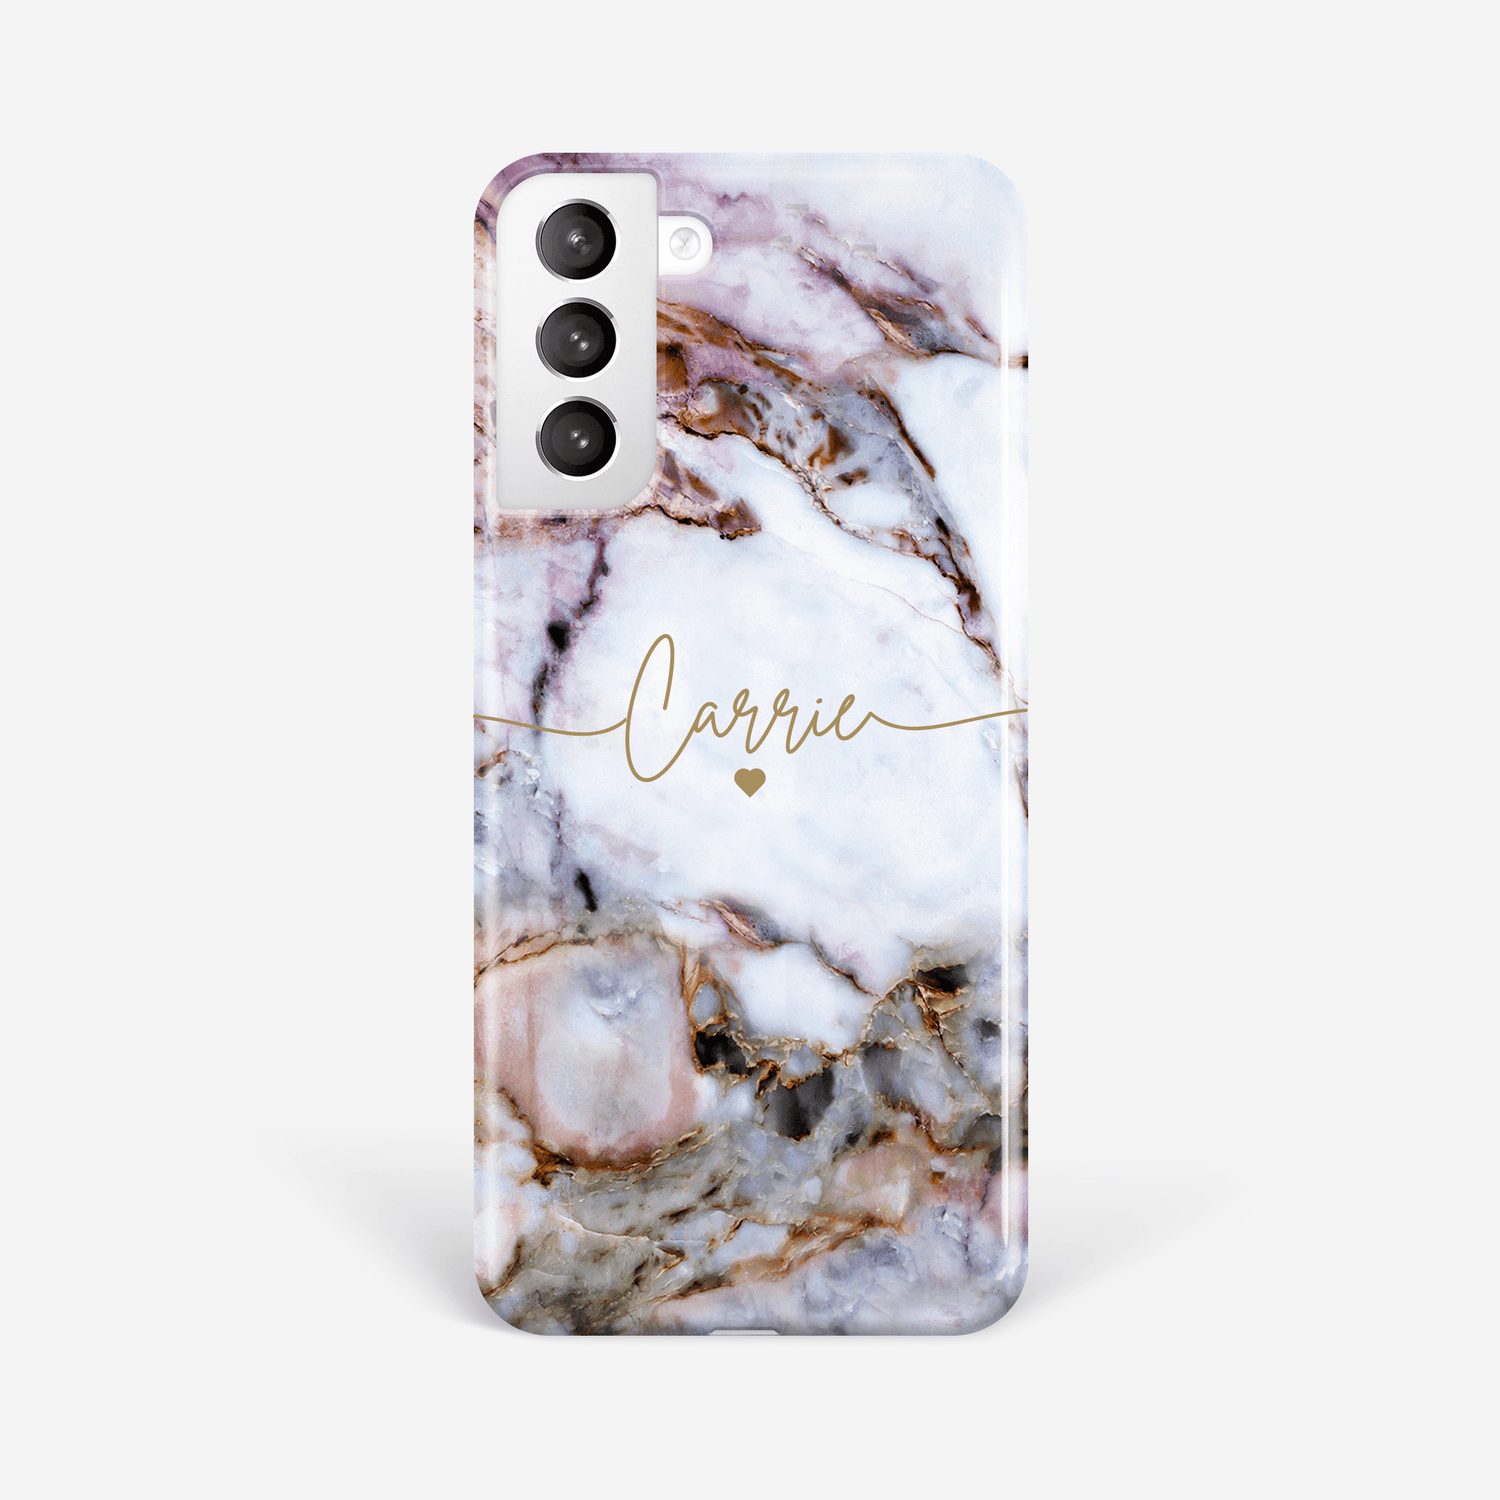 Personalised Name and Heart Marble Phone Case  Phone Case